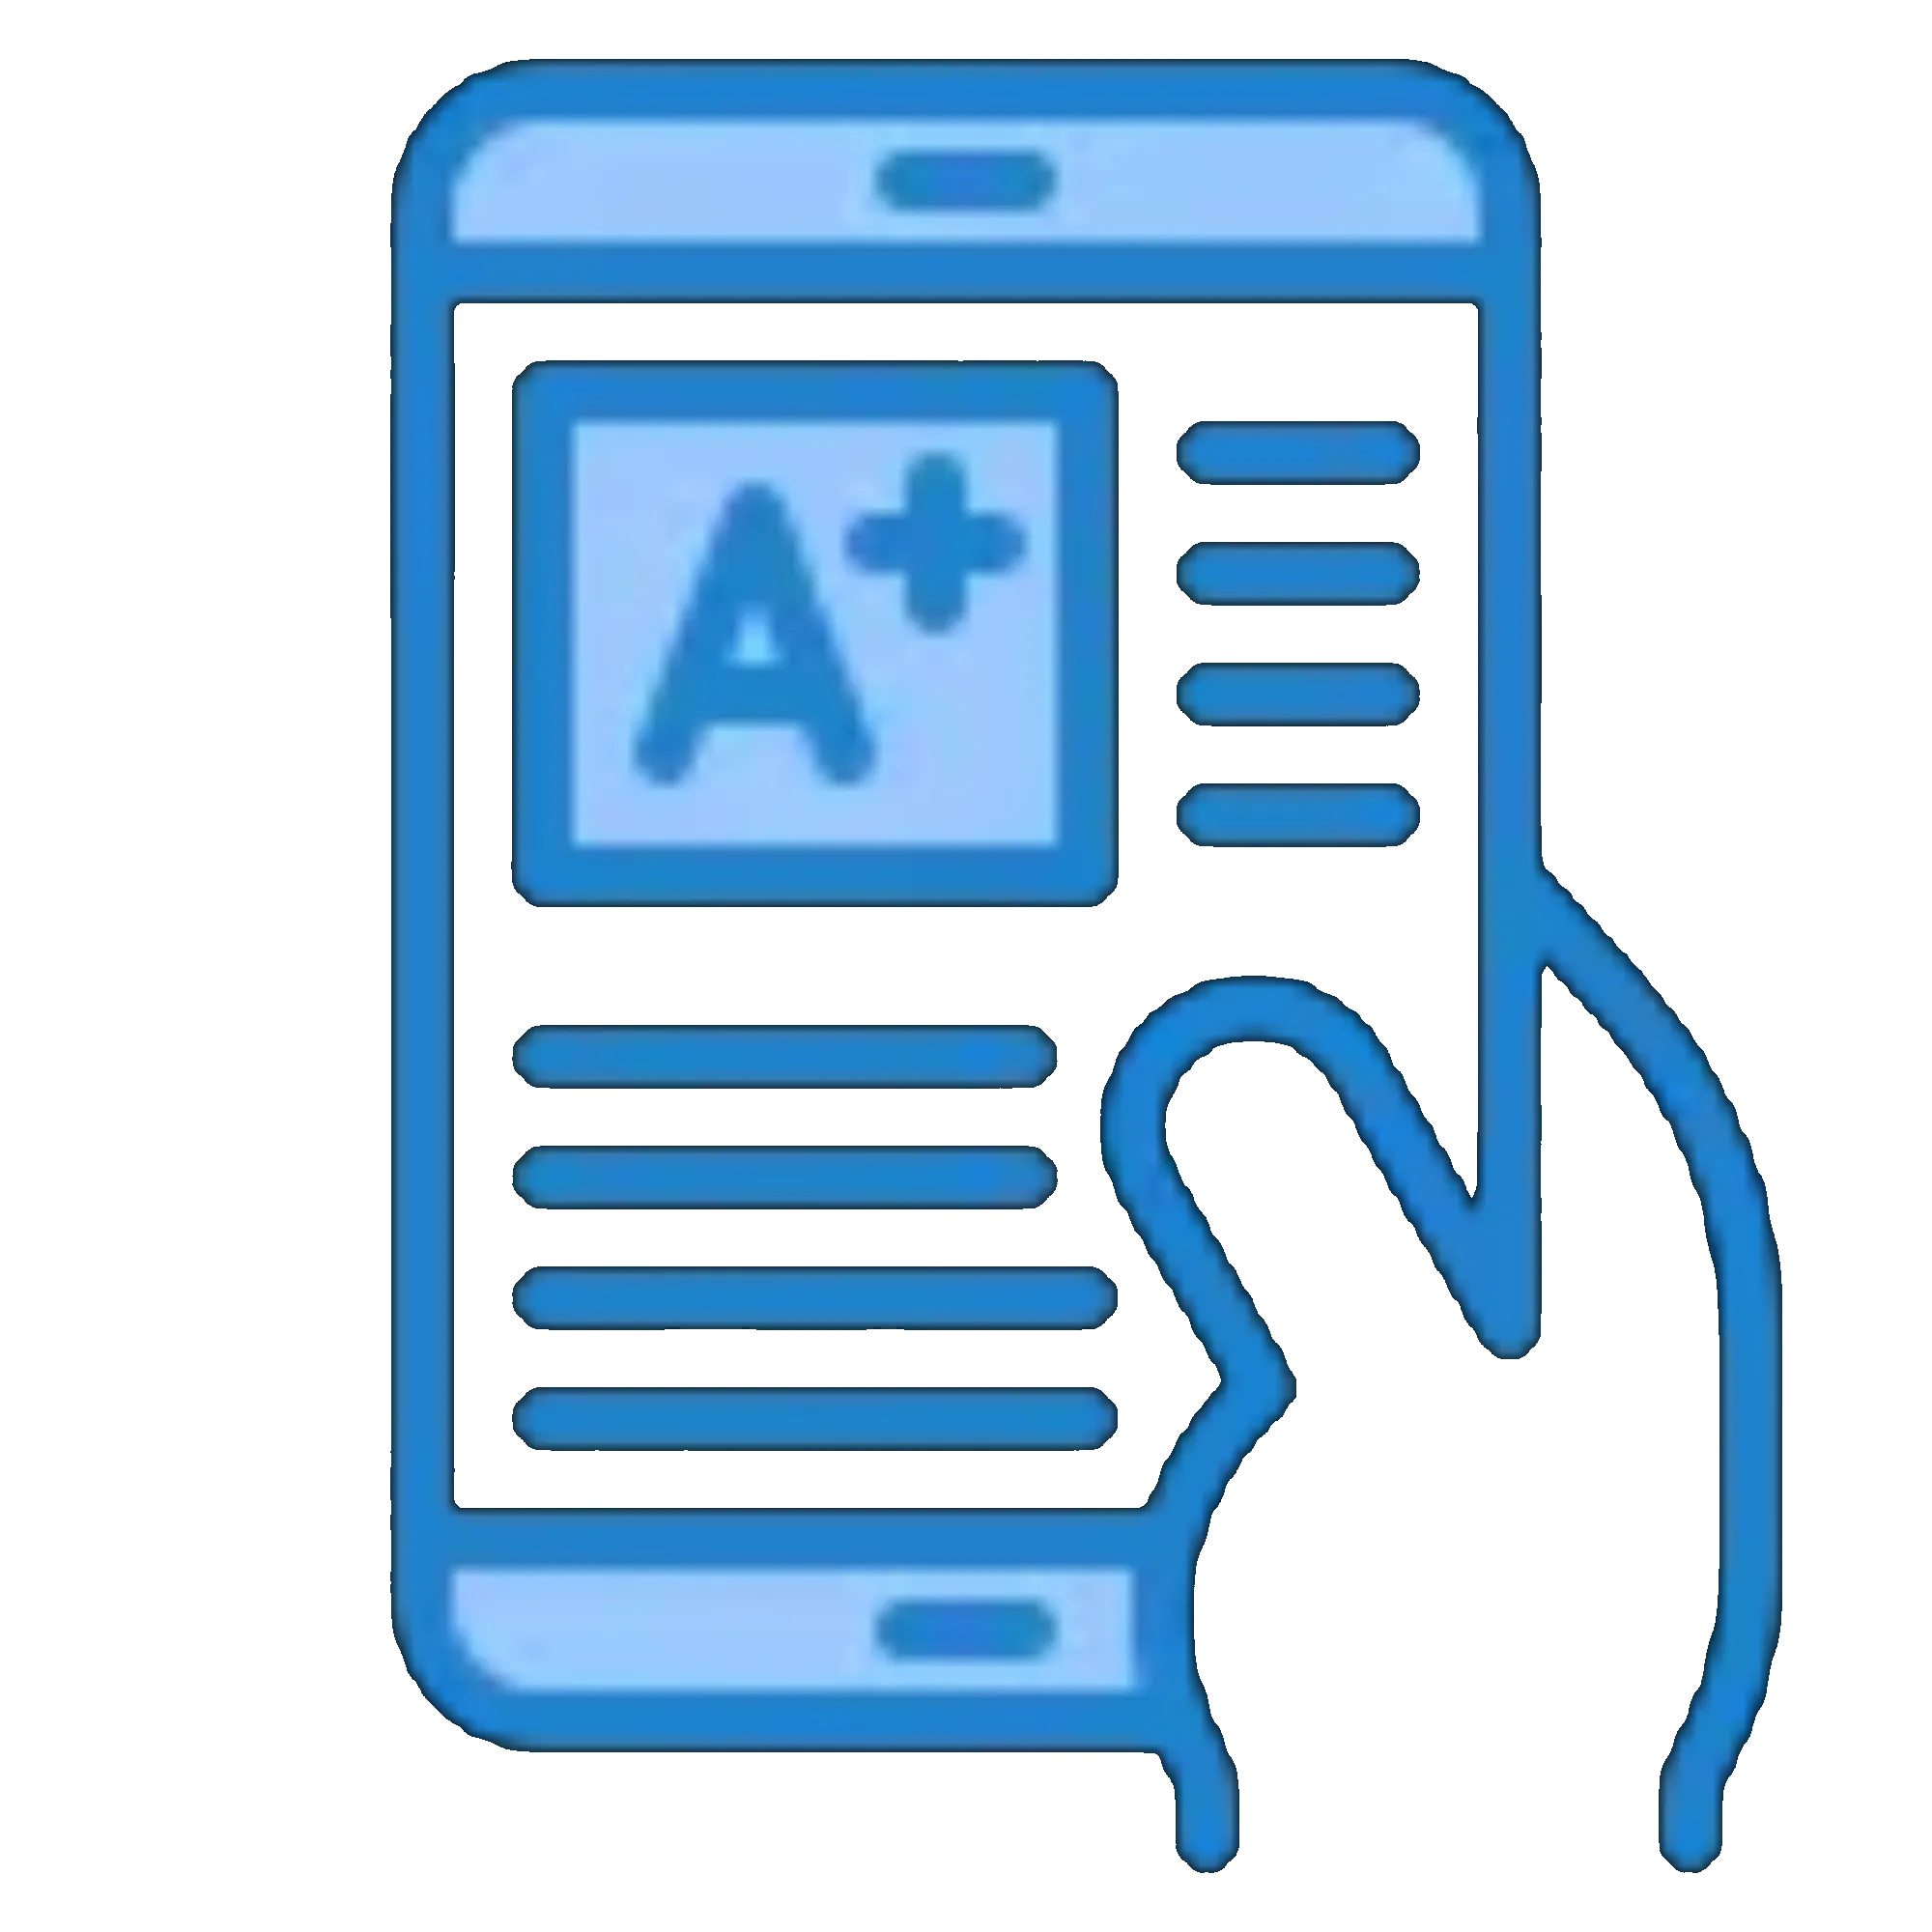 A graphic of a smartphone displaying an a+ grade on the screen, symbolizing excellent academic performance or test results accessed through mobile technology.